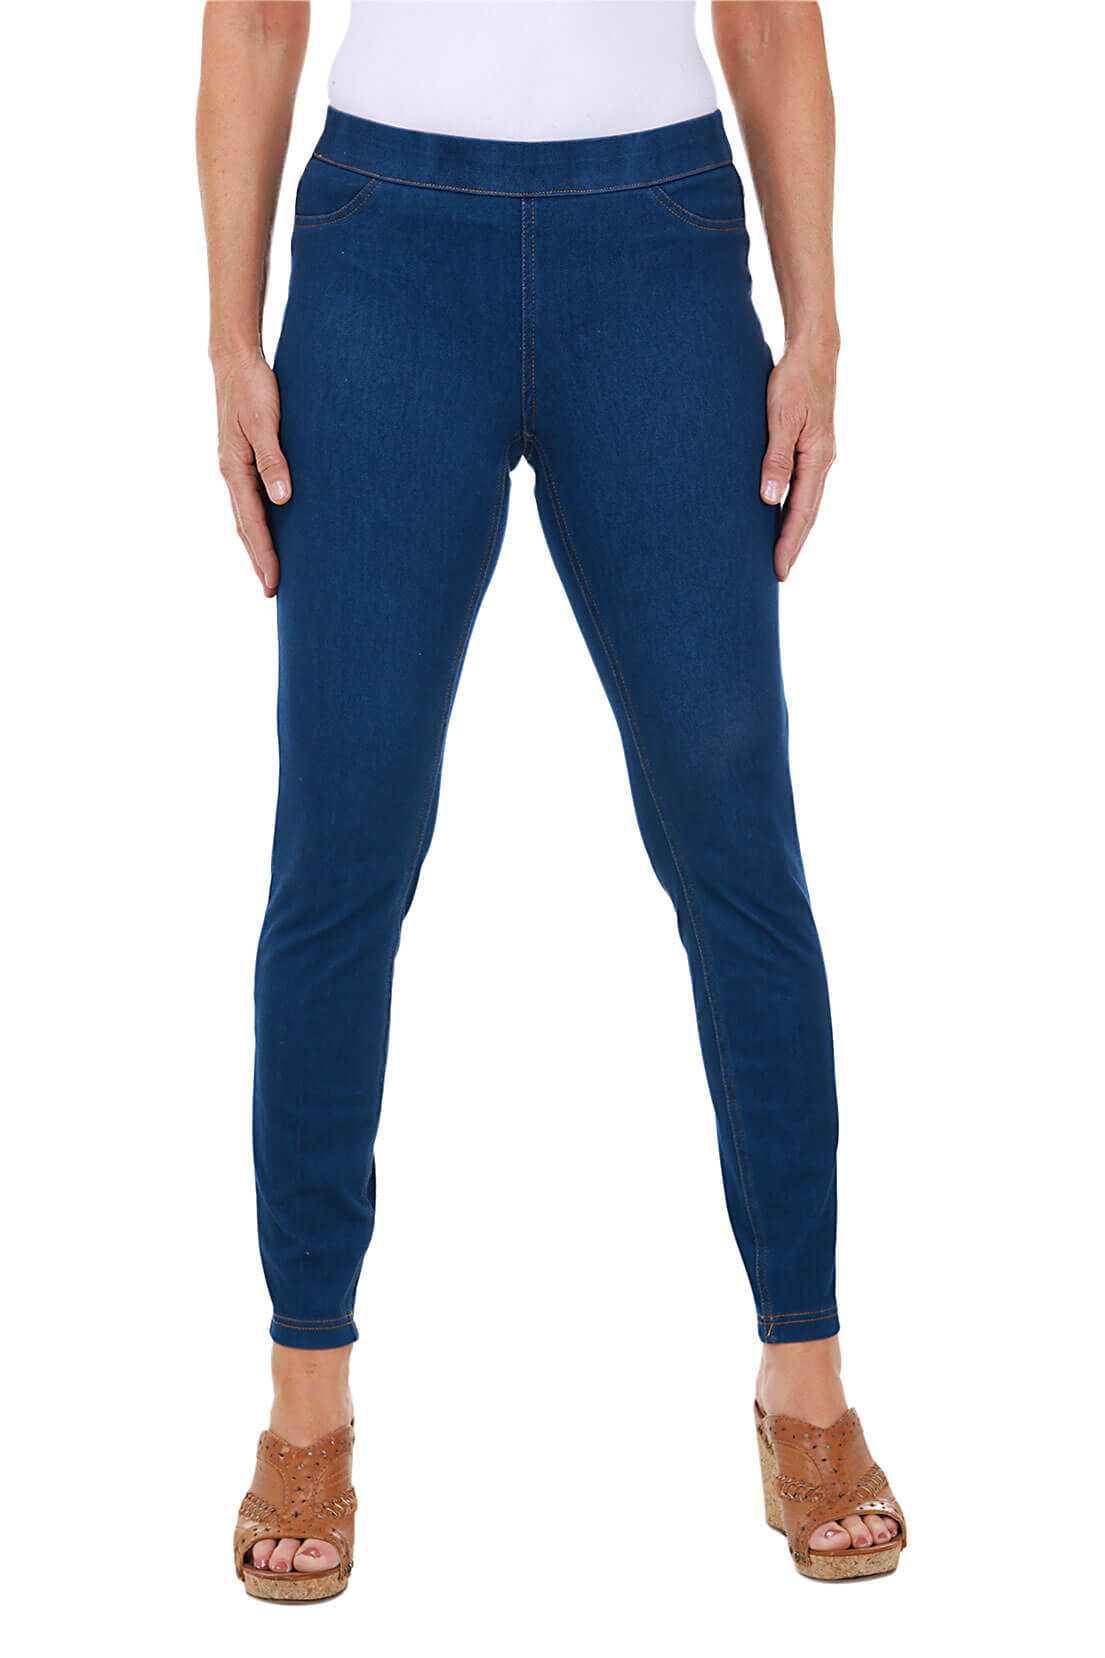 Cotton pant for regular wear 25 colors available Women Jeggings